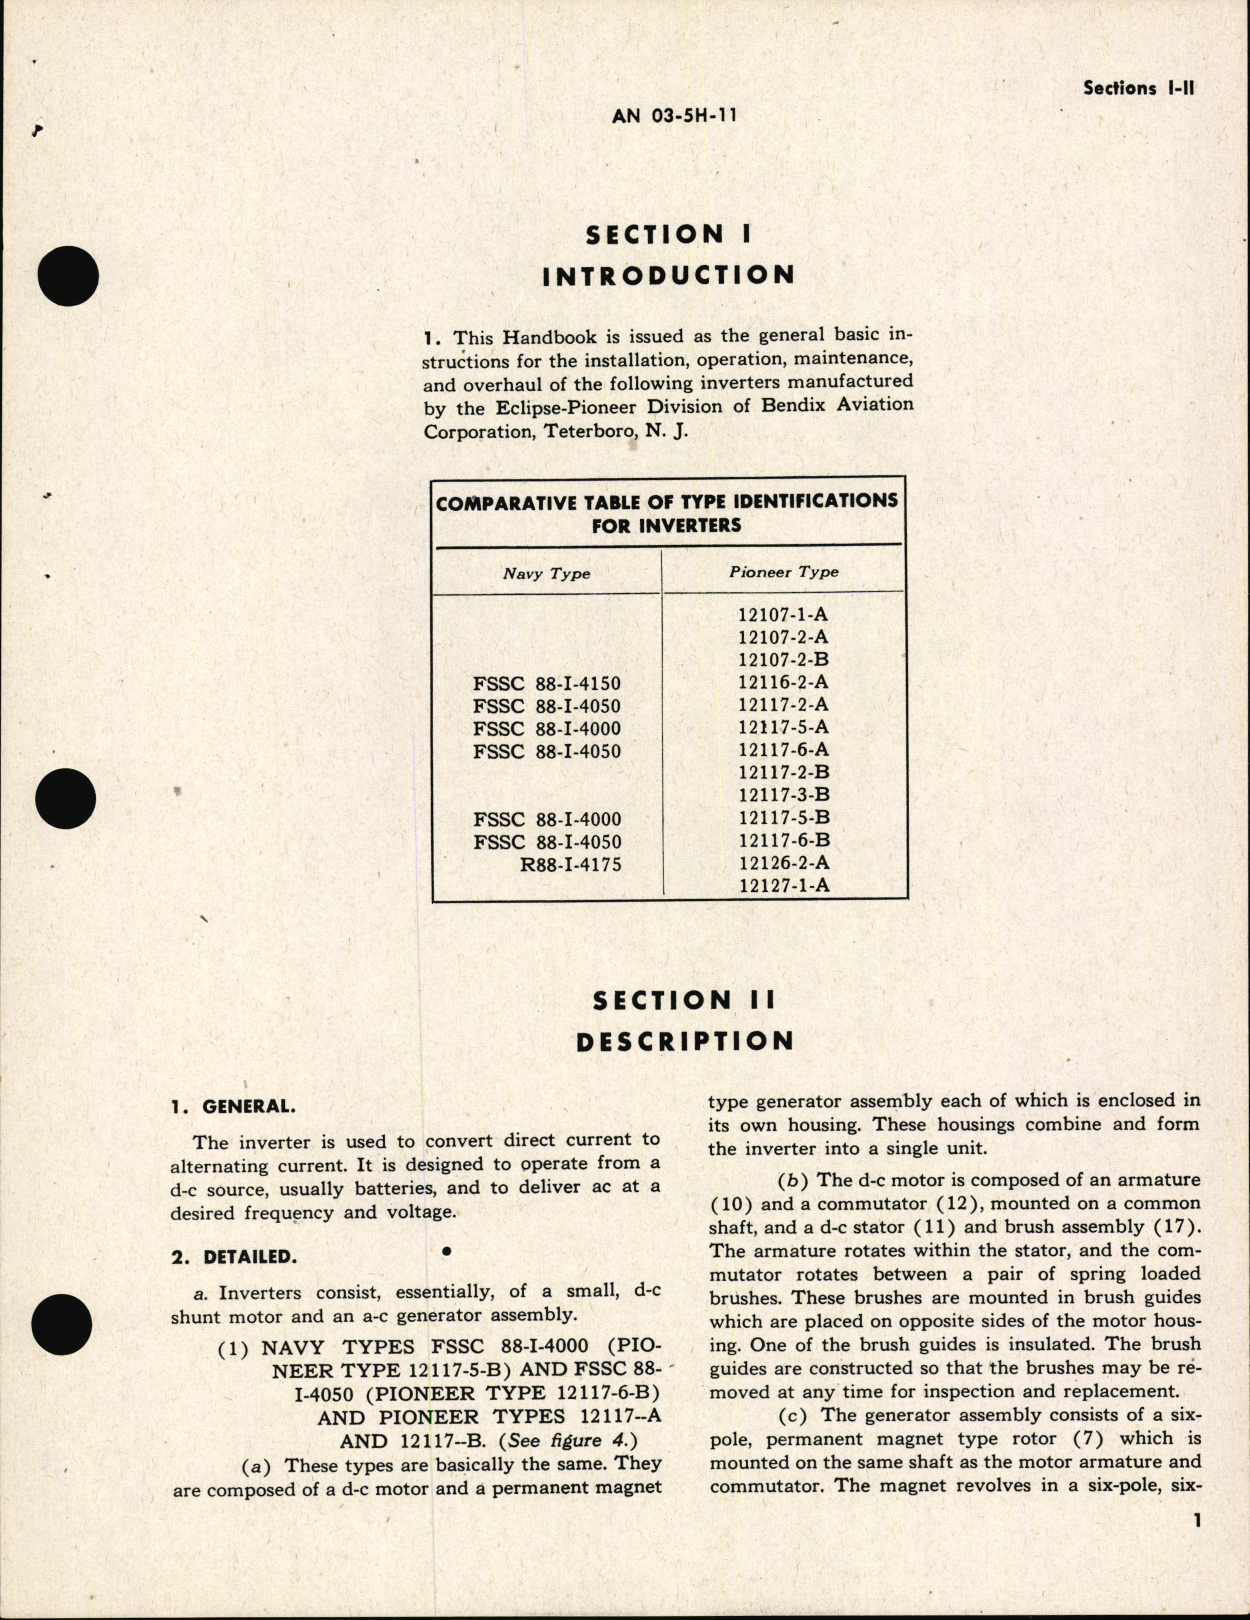 Sample page 7 from AirCorps Library document: Operation, Service & Overhaul Instructions with Parts Catalog for Inverters